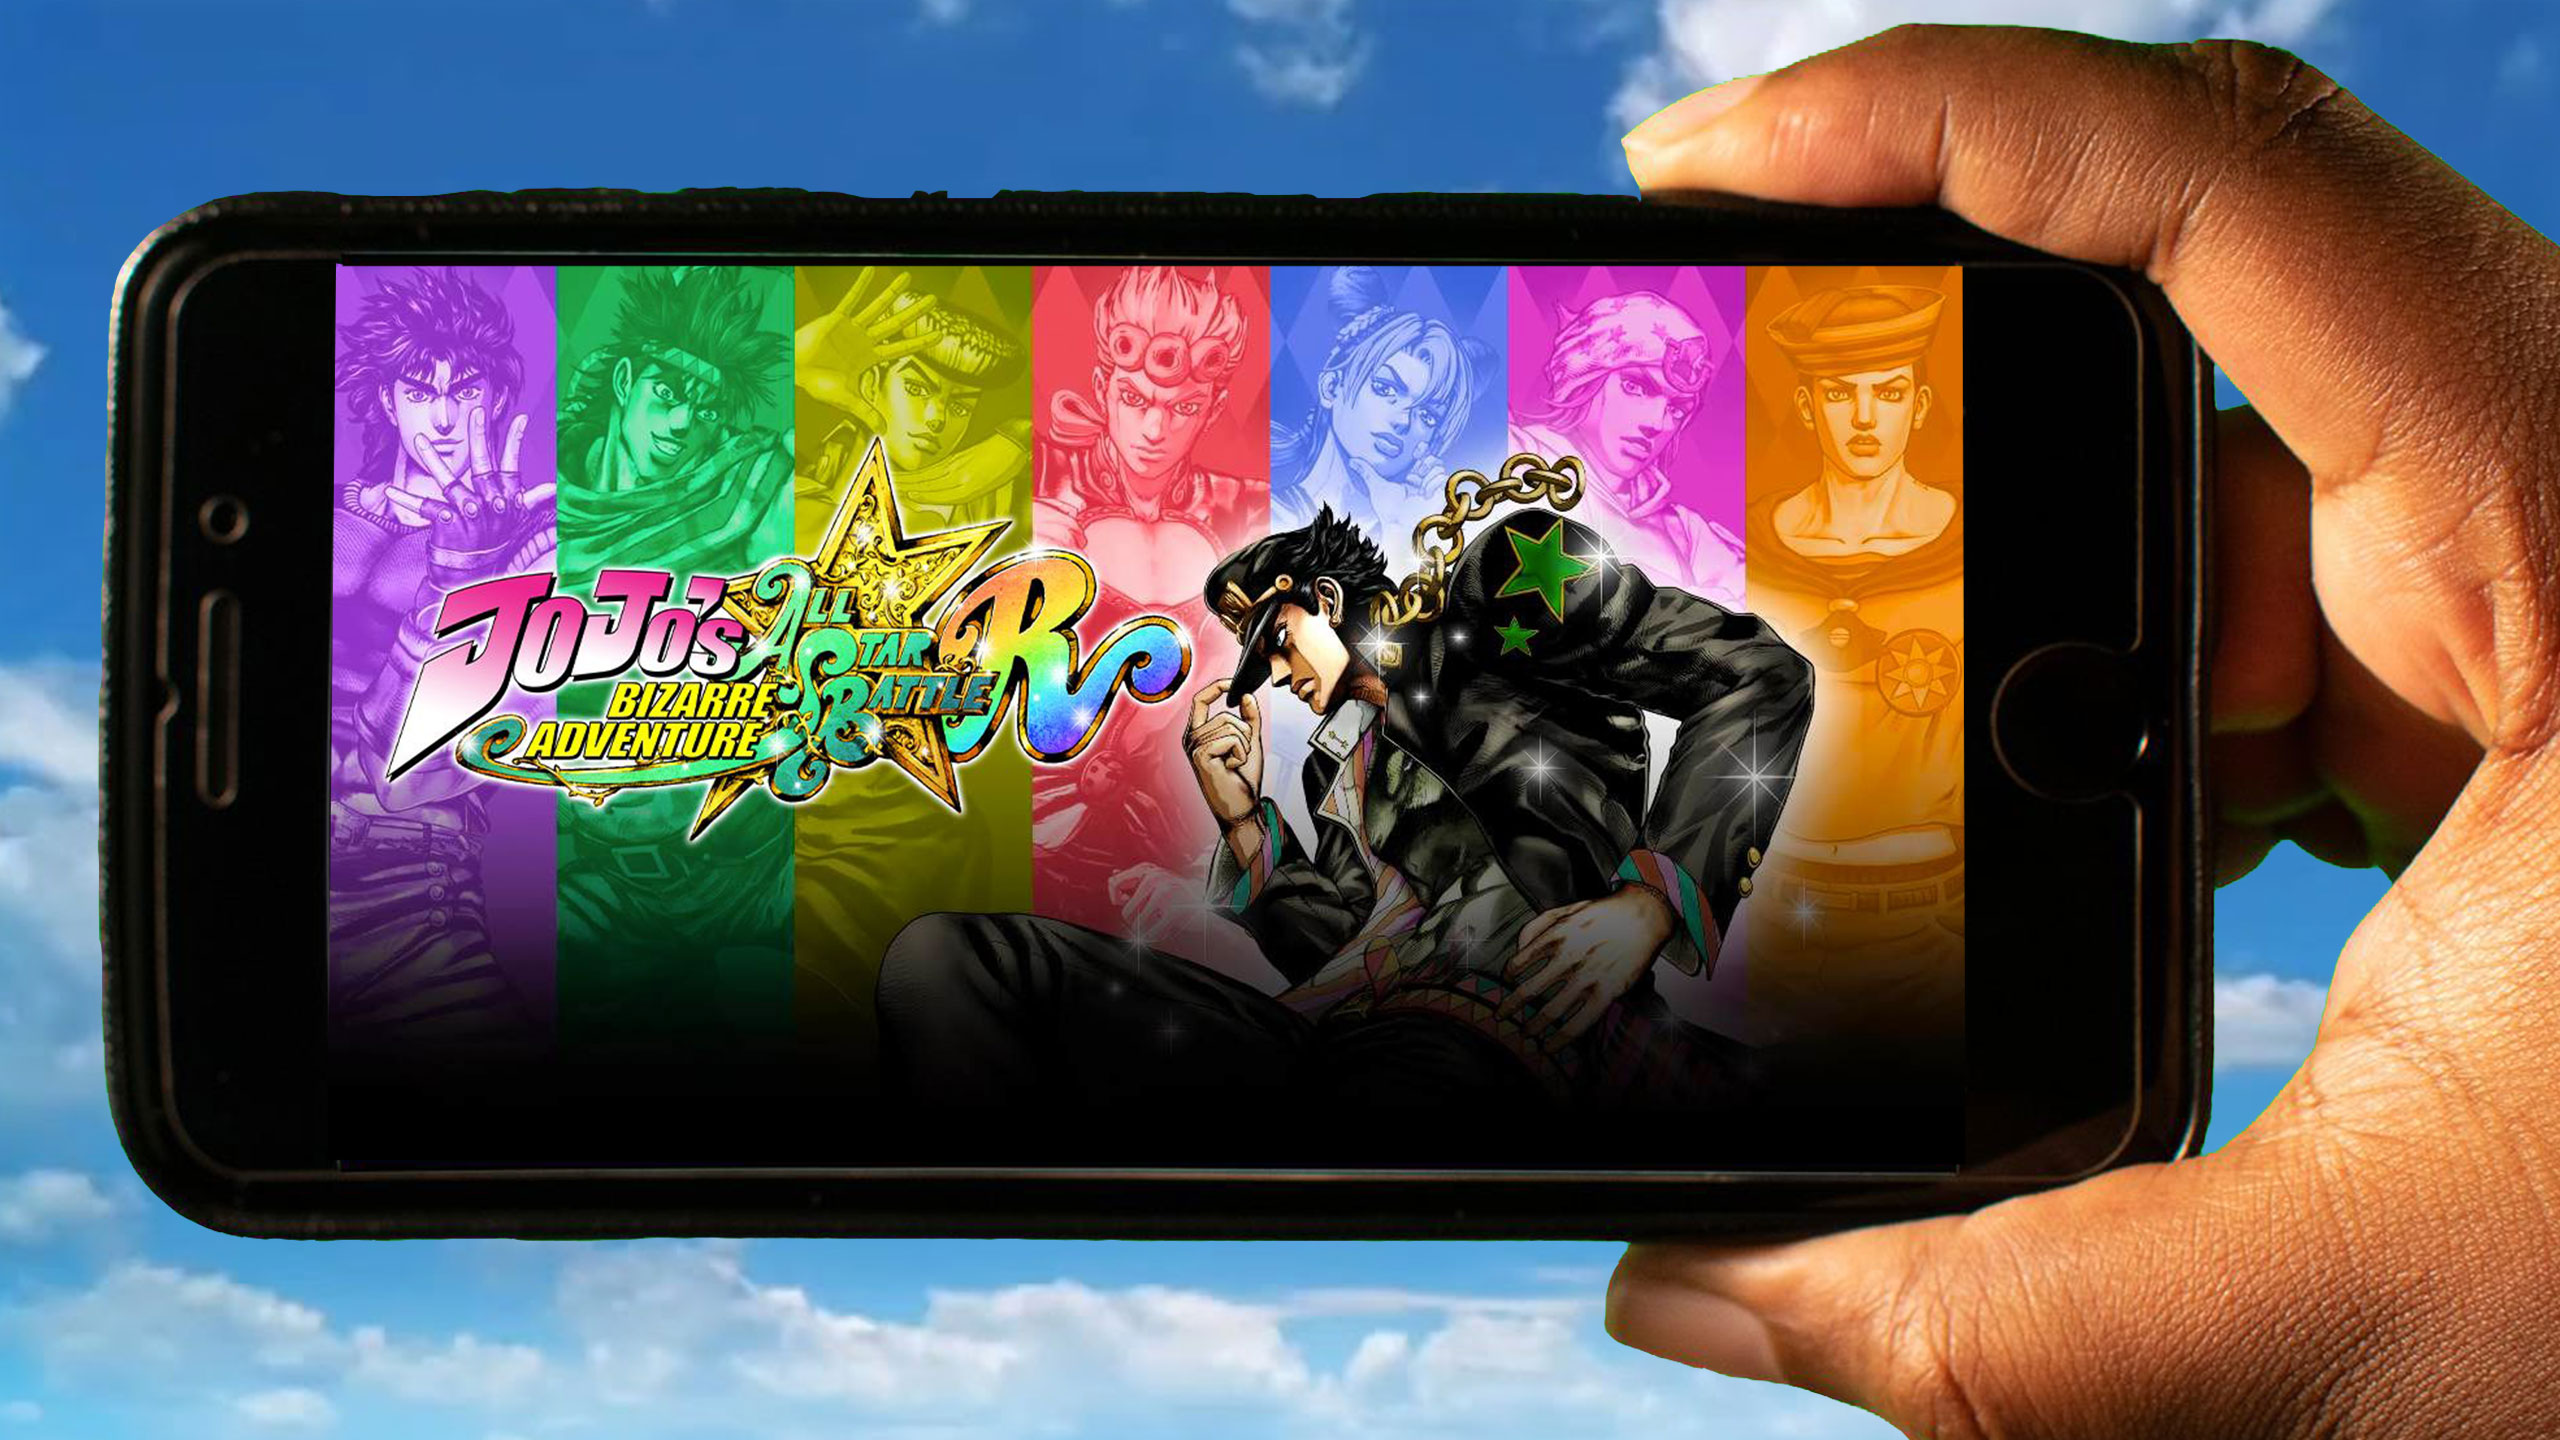 Stream Jojo Game Mobile: The Best Anime Game for Your Phone by Tivalflexsu